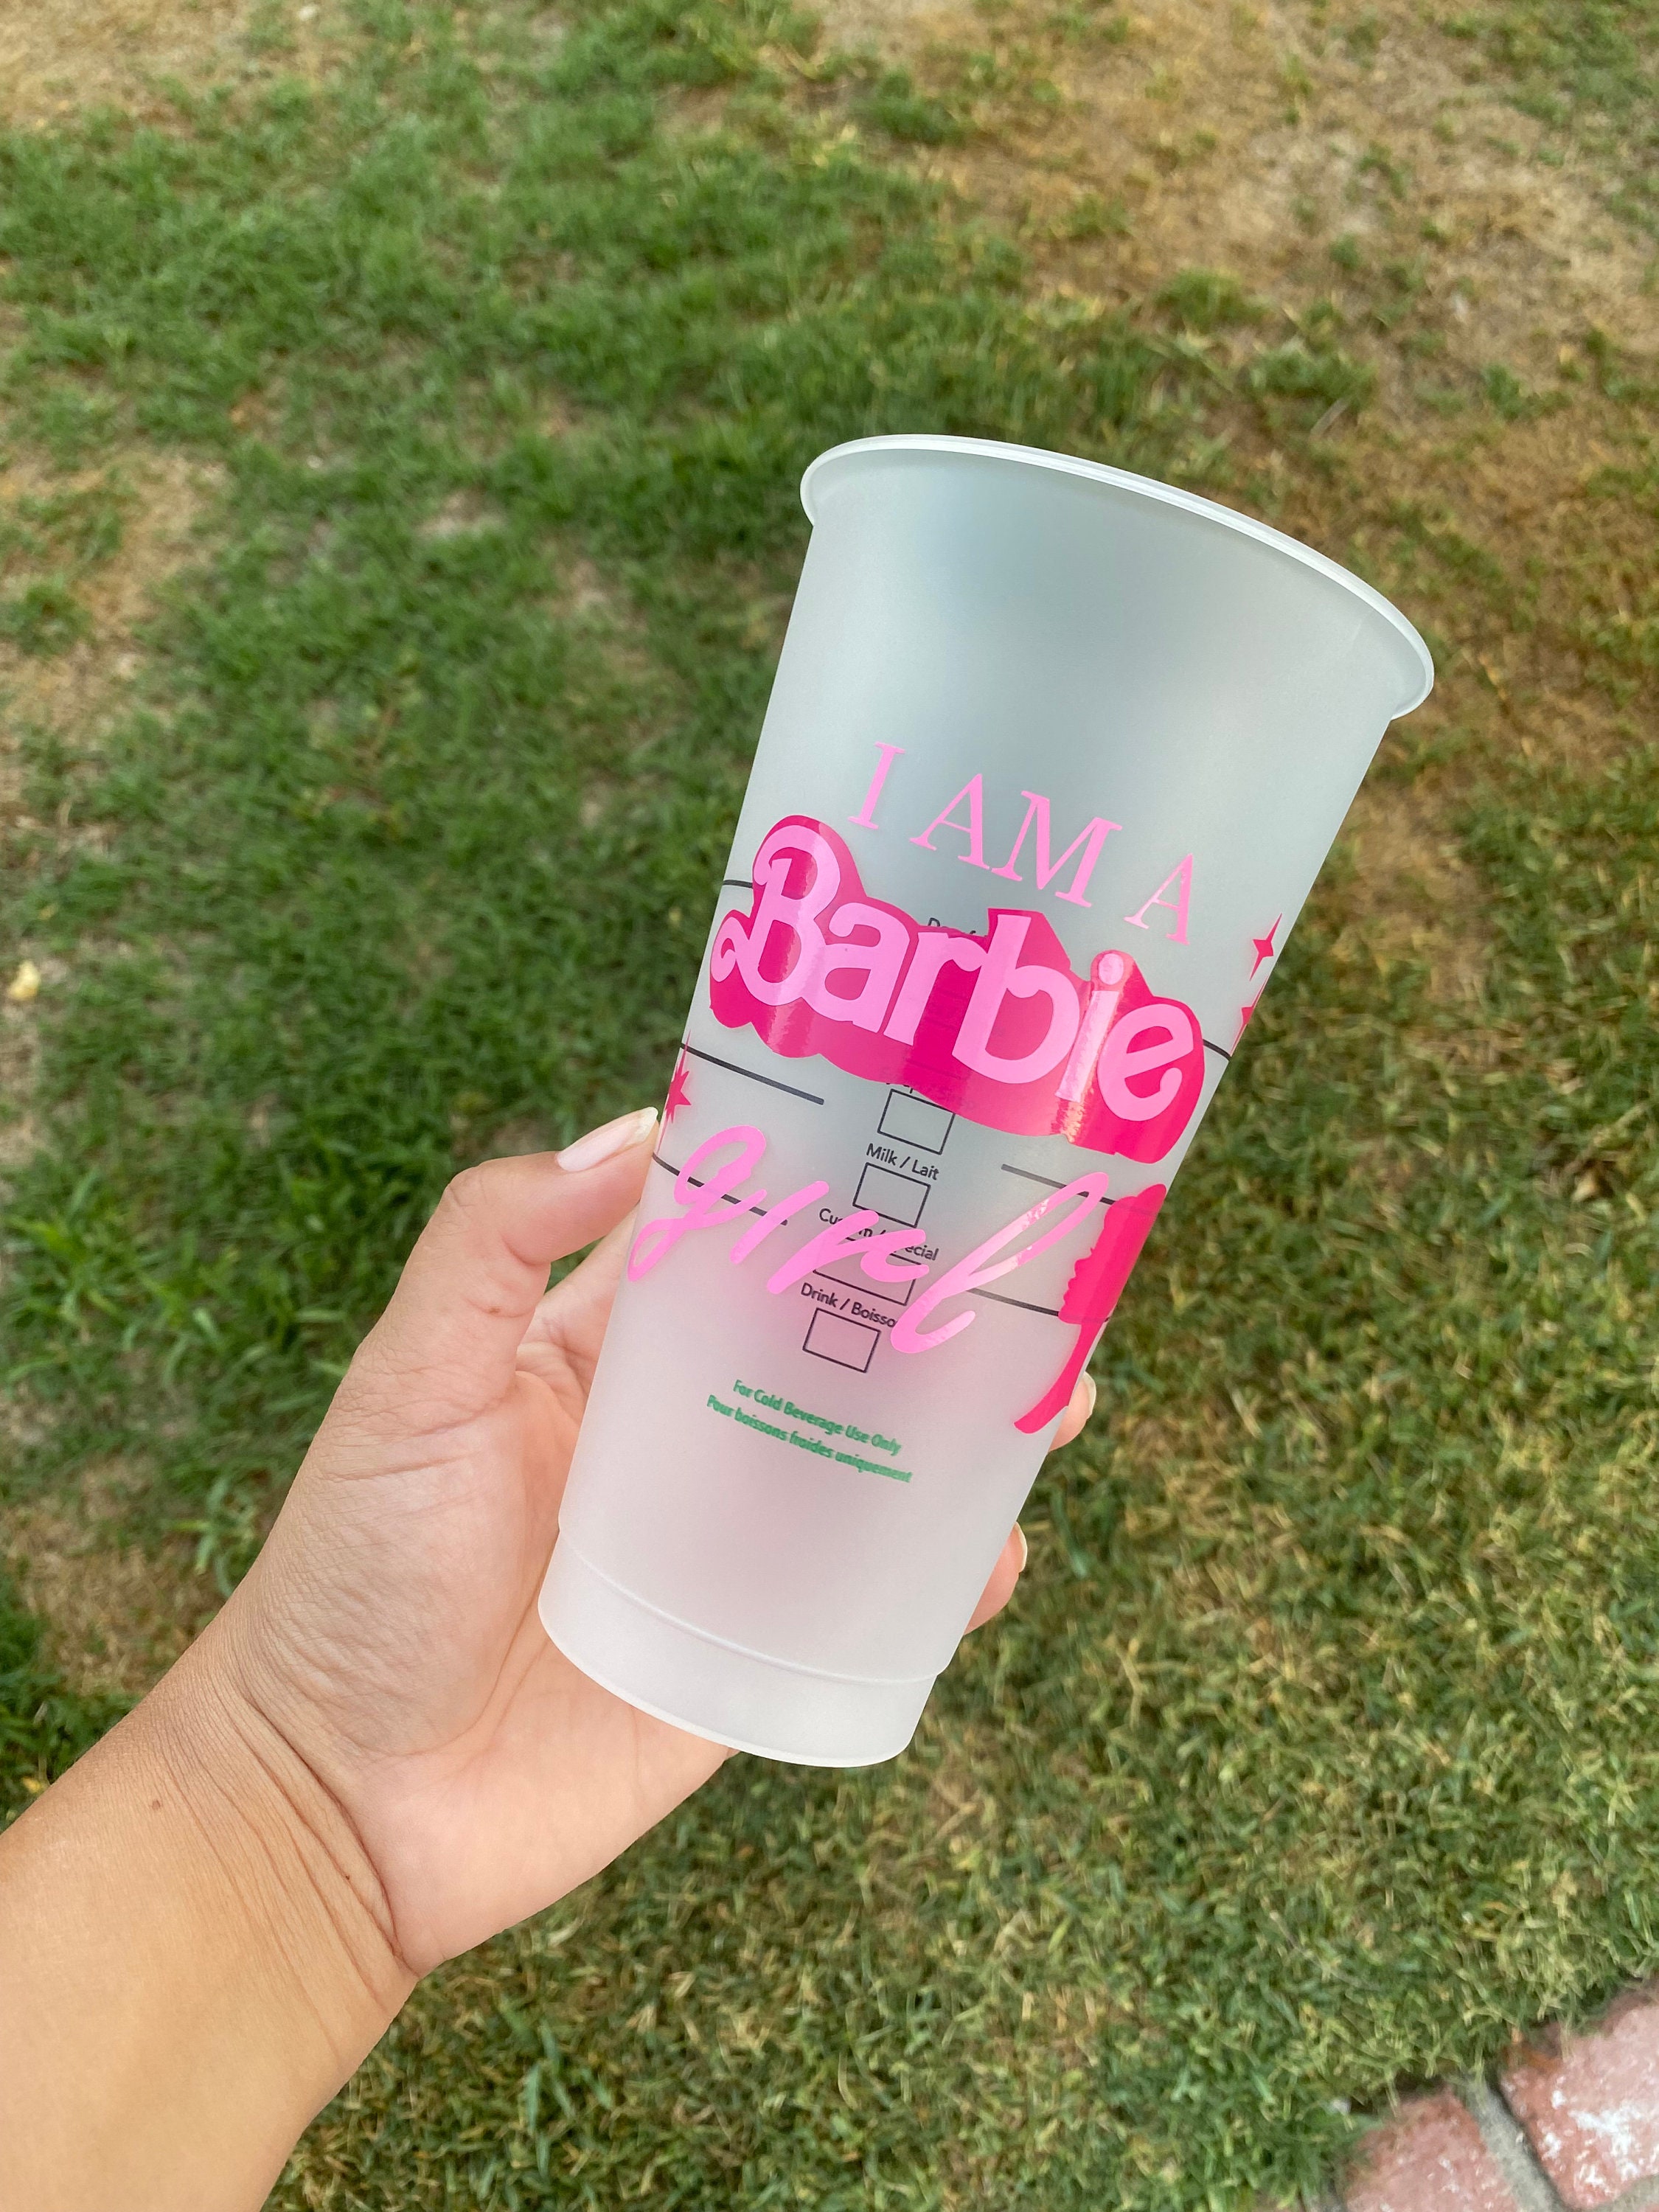 Barbie Logo Vinyl Decal Sticker - Great for Wine Glasses, Cups, Mugs